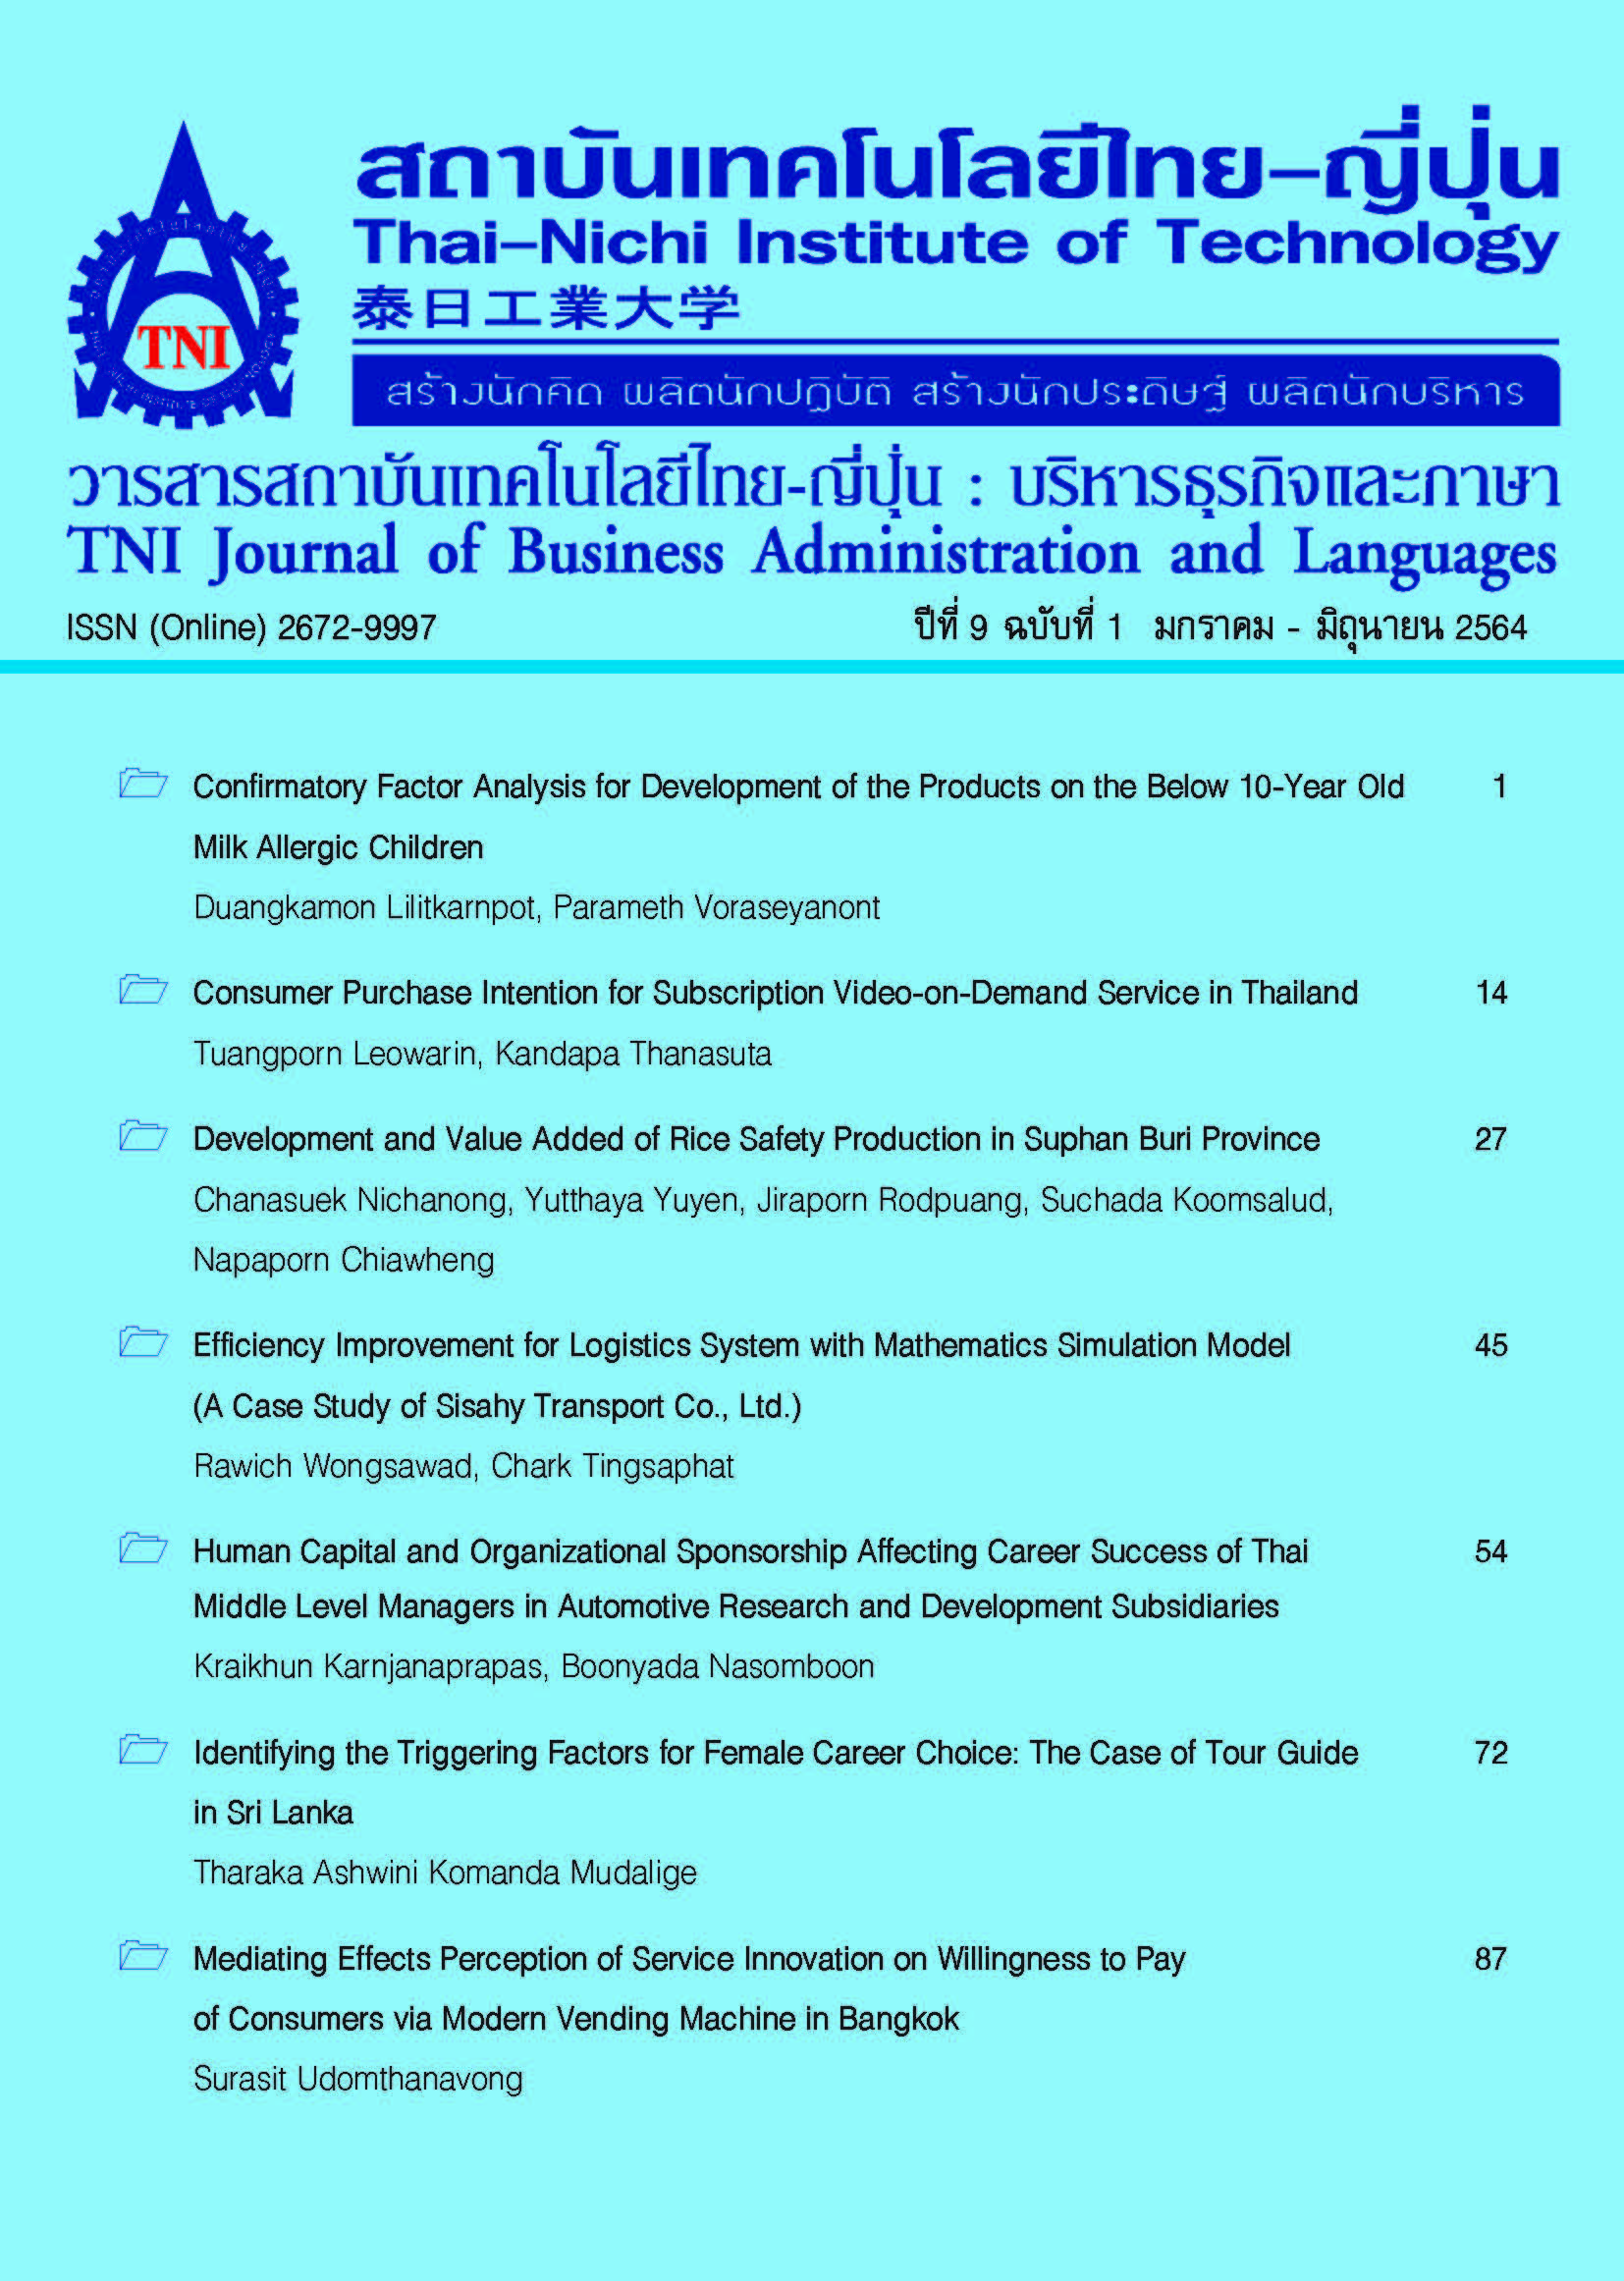 Consumer Purchase Intention for Subscription Video-on-Demand Service in Thailand Journal of Business Administration and Languages (JBAL)